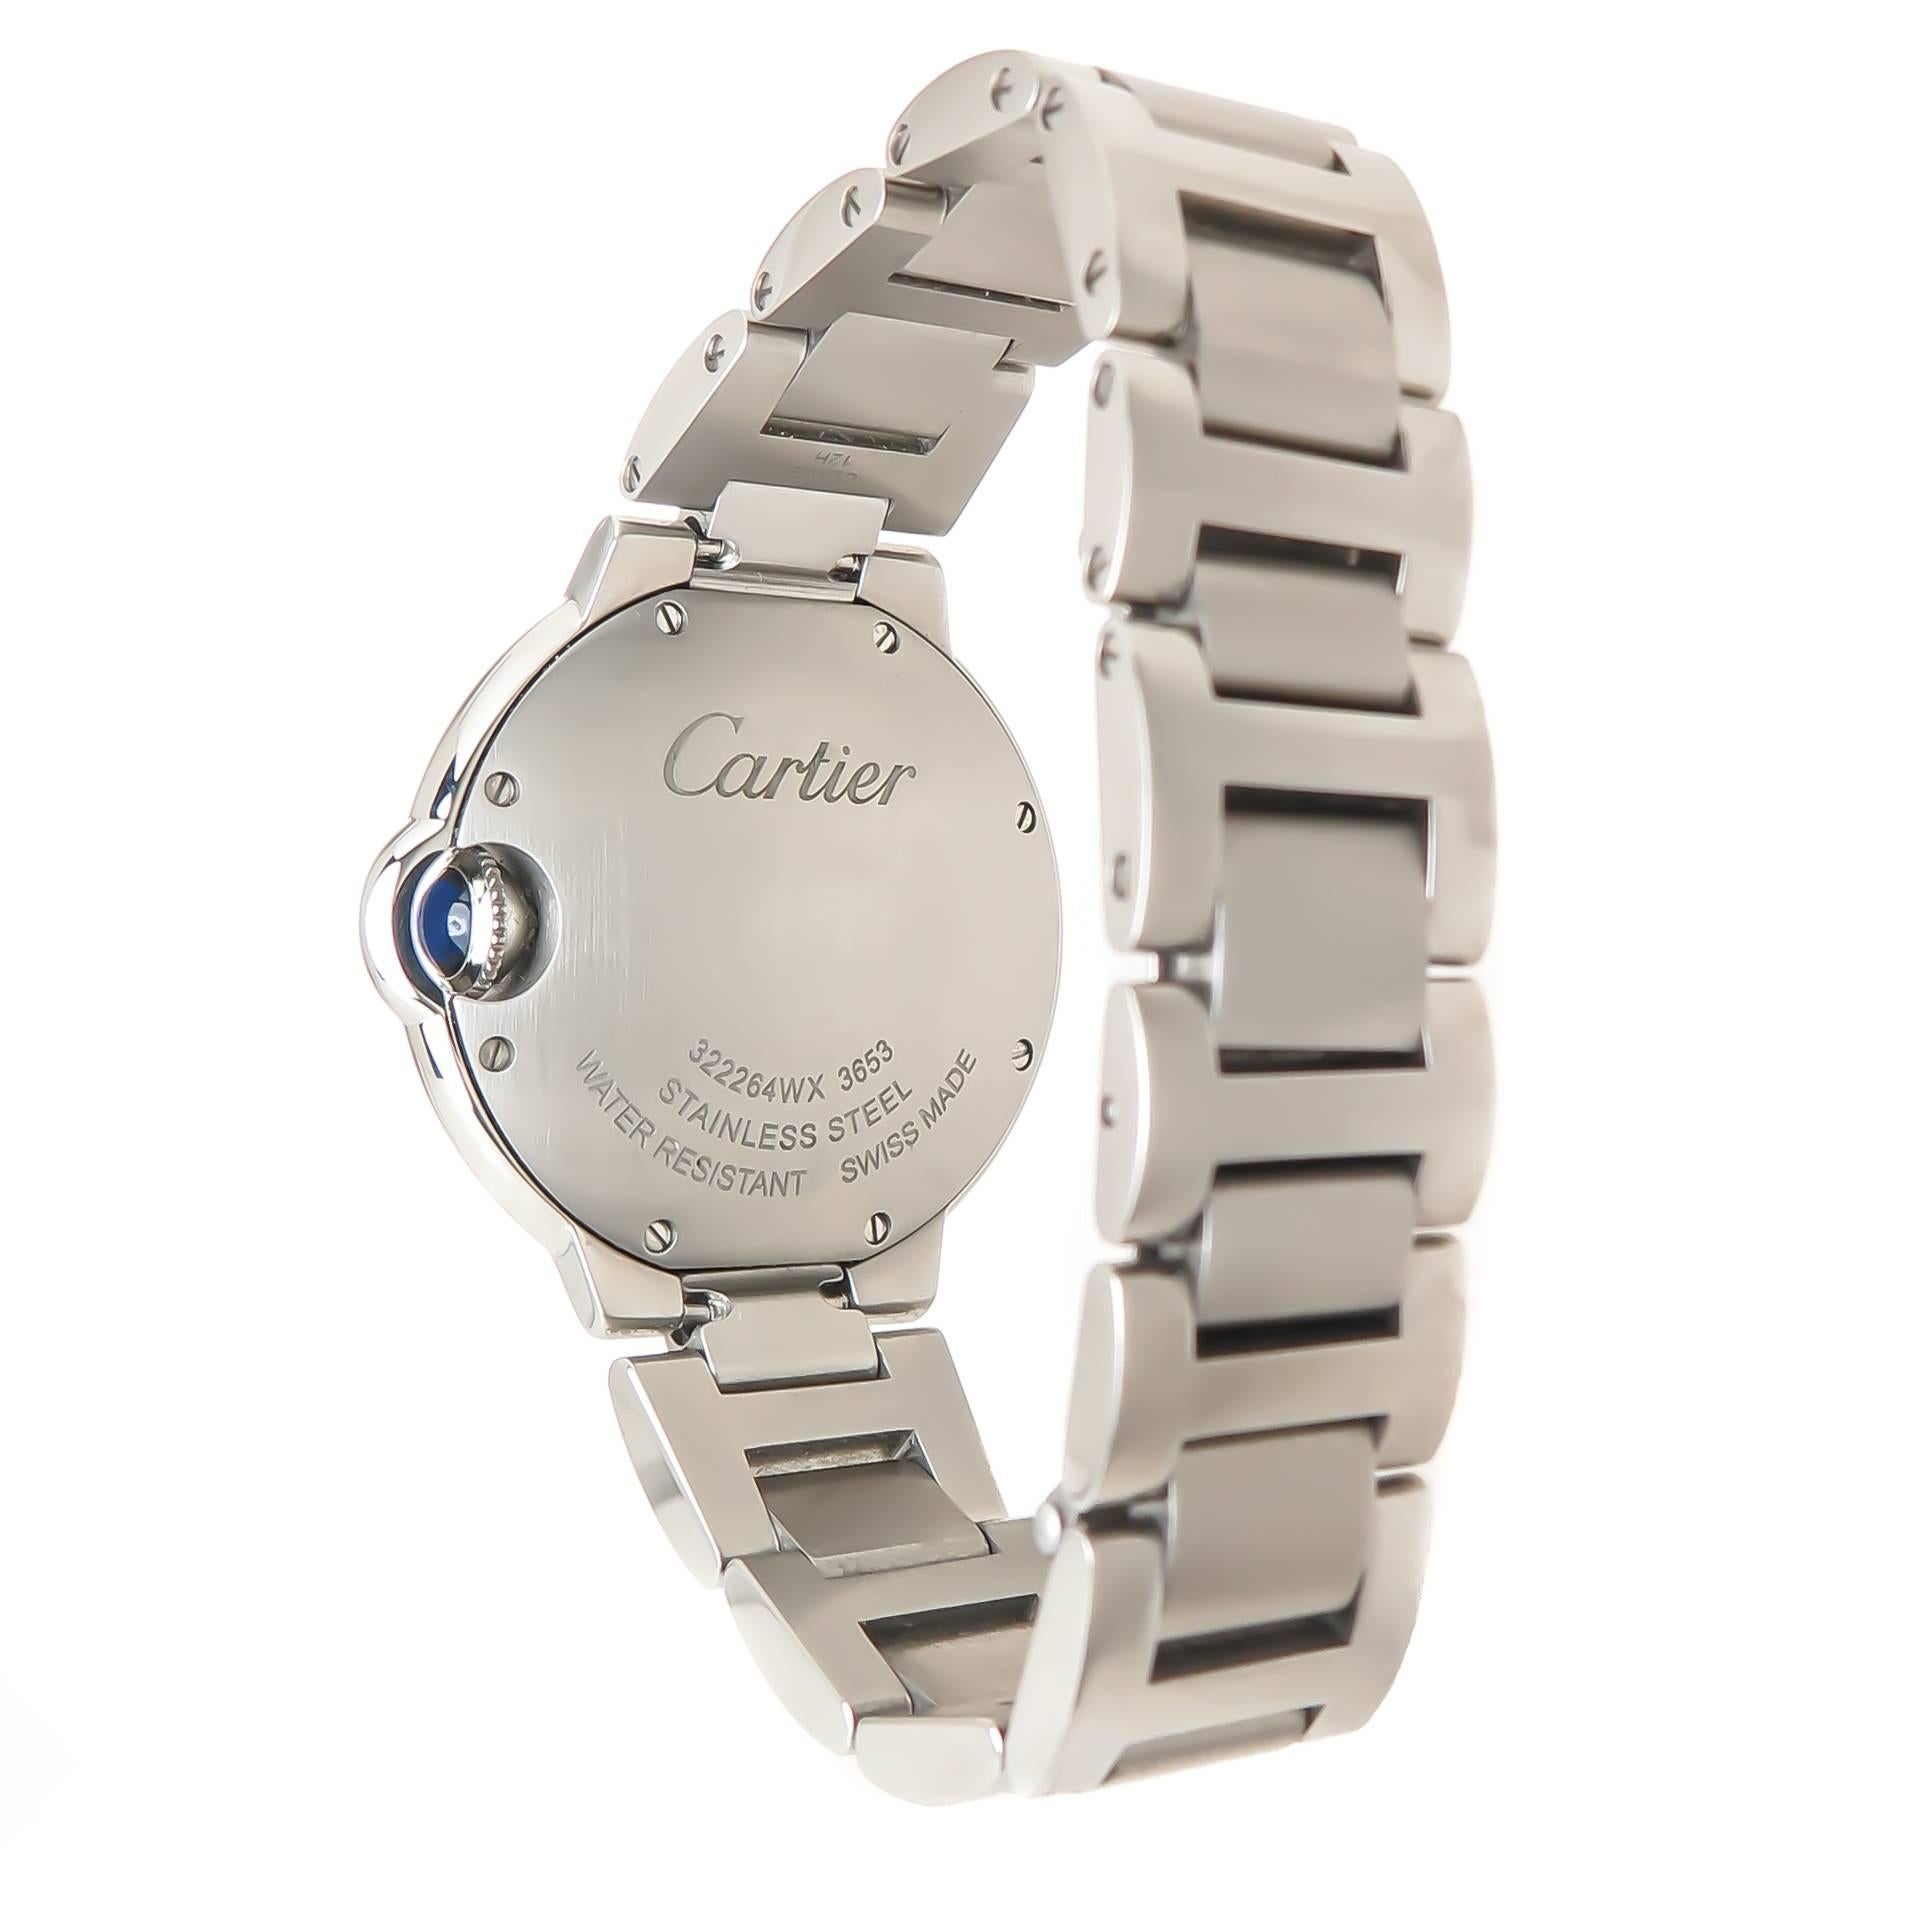 Circa 2016 Cartier Ballon Bleu Mid Size Wrist watch, 33 MM Stainless Steel water resistant case. Quartz Movement, Silvered, Engine turned Dial with Black Roman Numerals. 9/16 inch wide Bracelet with Deployment Buckle, fully linked and adjustable for